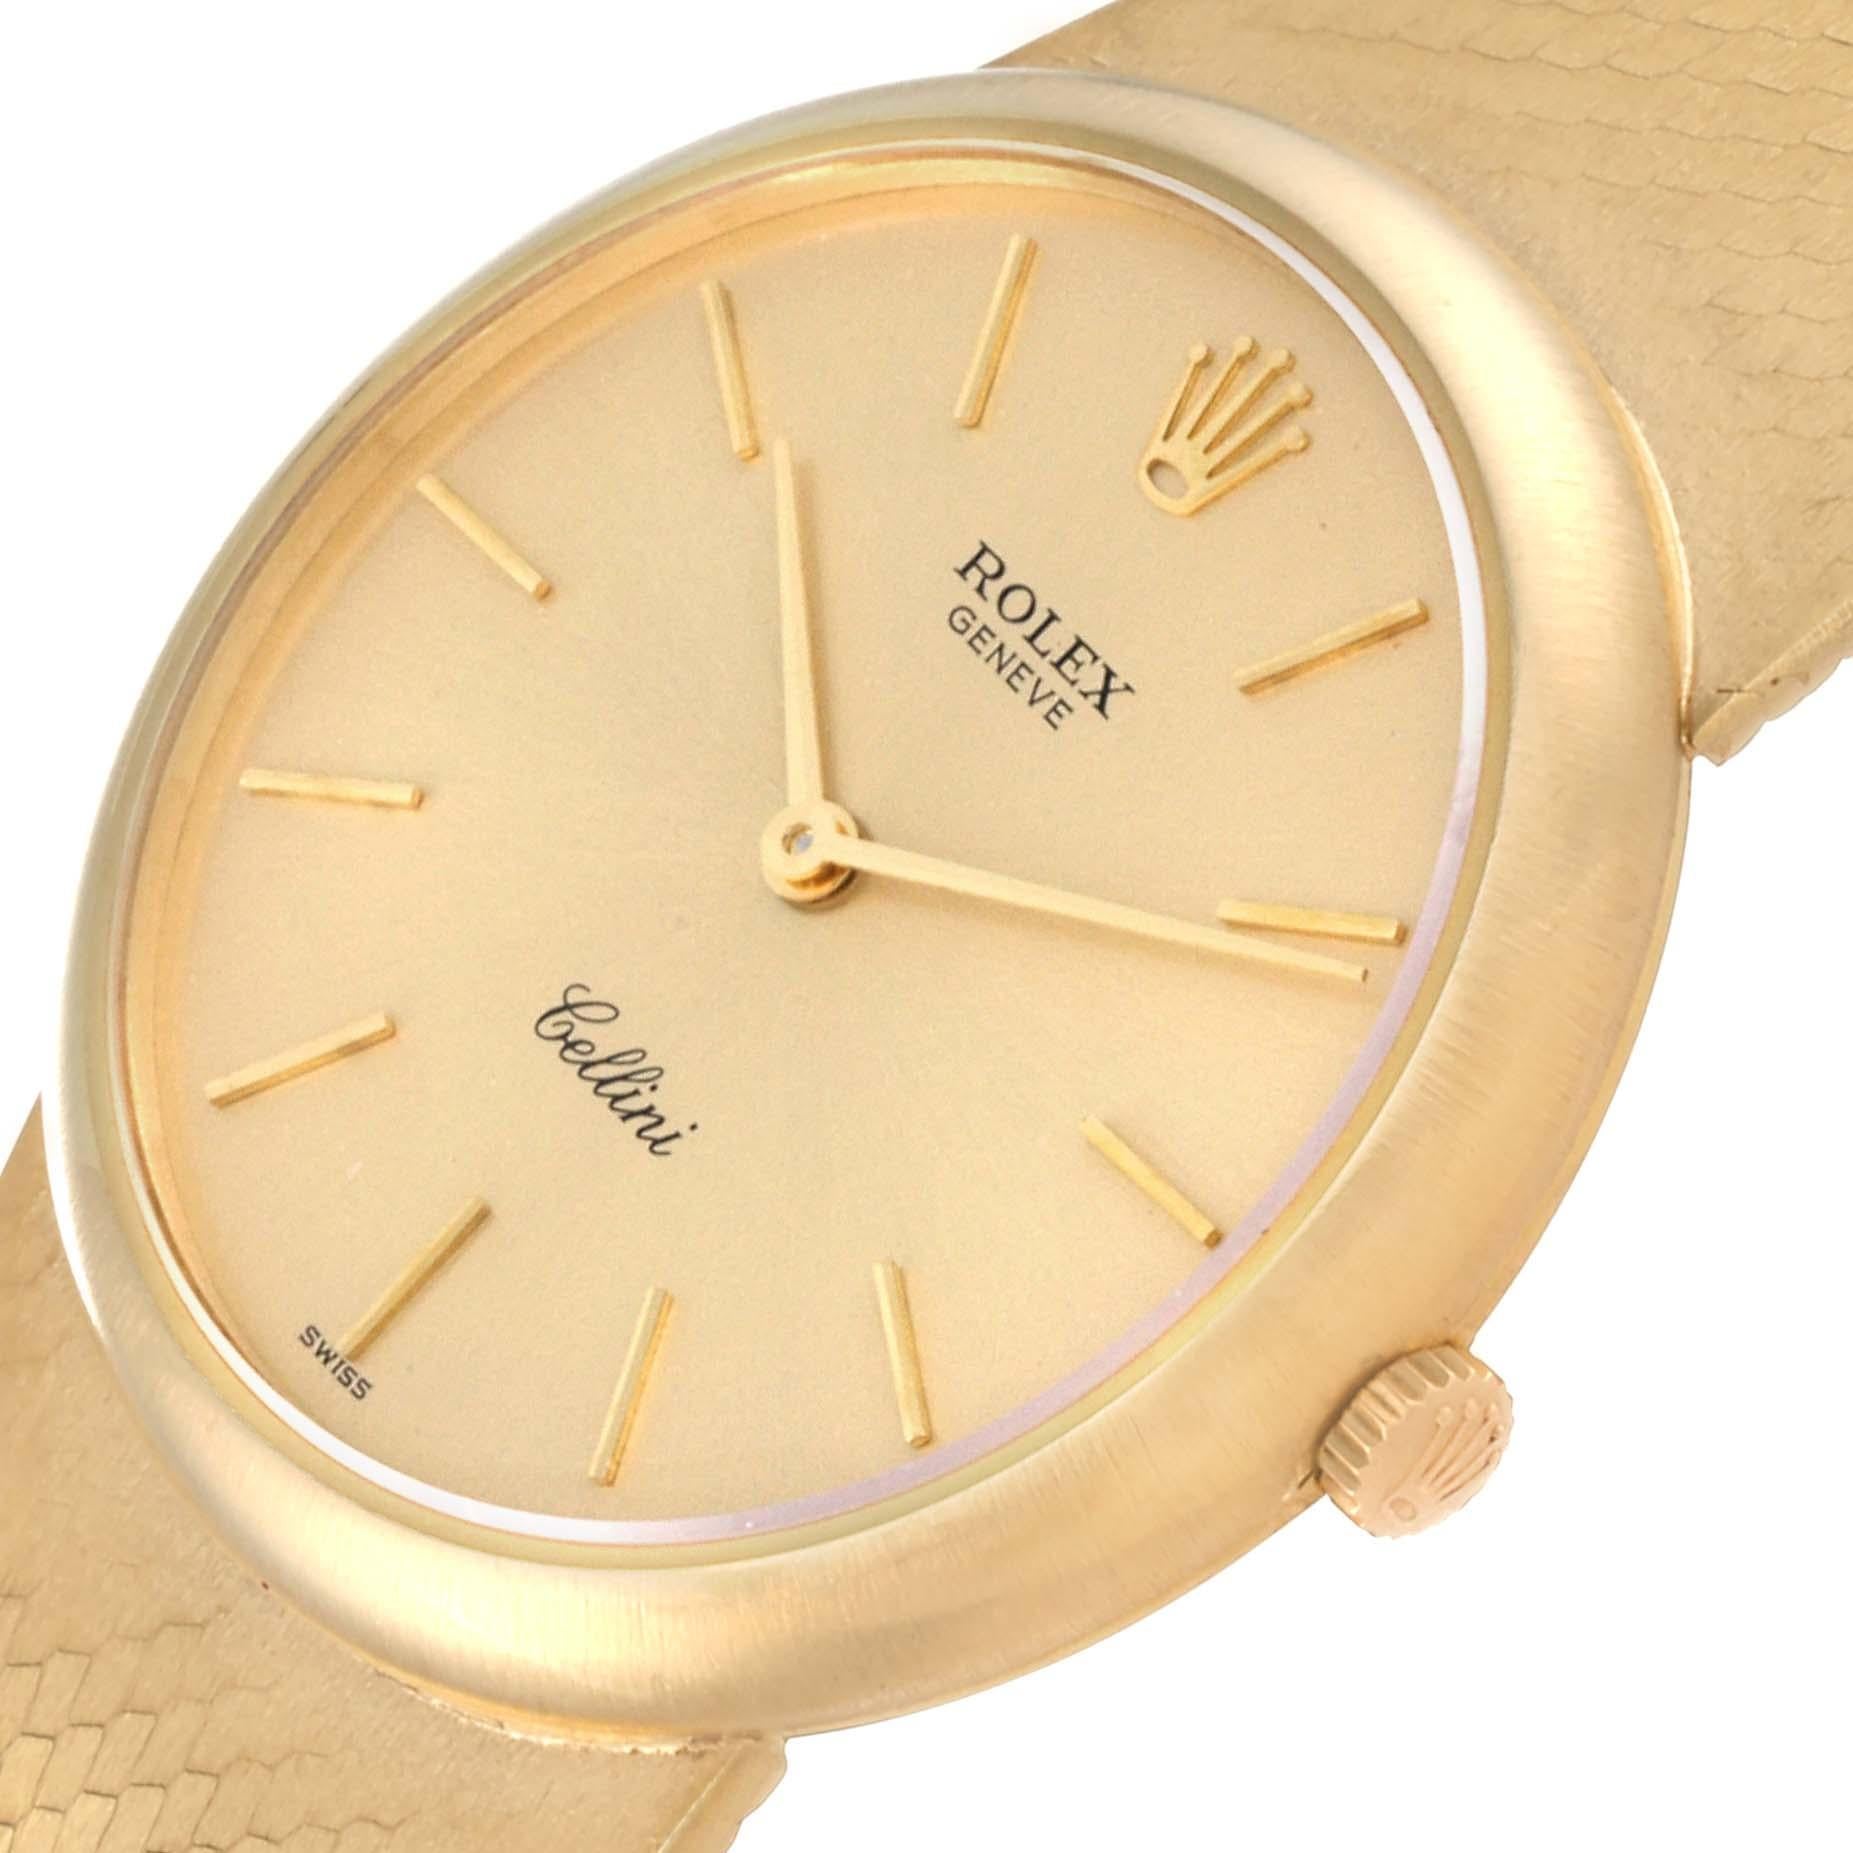 Rolex Cellini Yellow Gold Vintage Ladies Watch 653. Manual winding movement. 14k yellow gold round case 30.5 mm in diameter. . Scratch resistant sapphire crystal. Champagne dial with raised gold baton hour markers. 14k yellow gold integrated